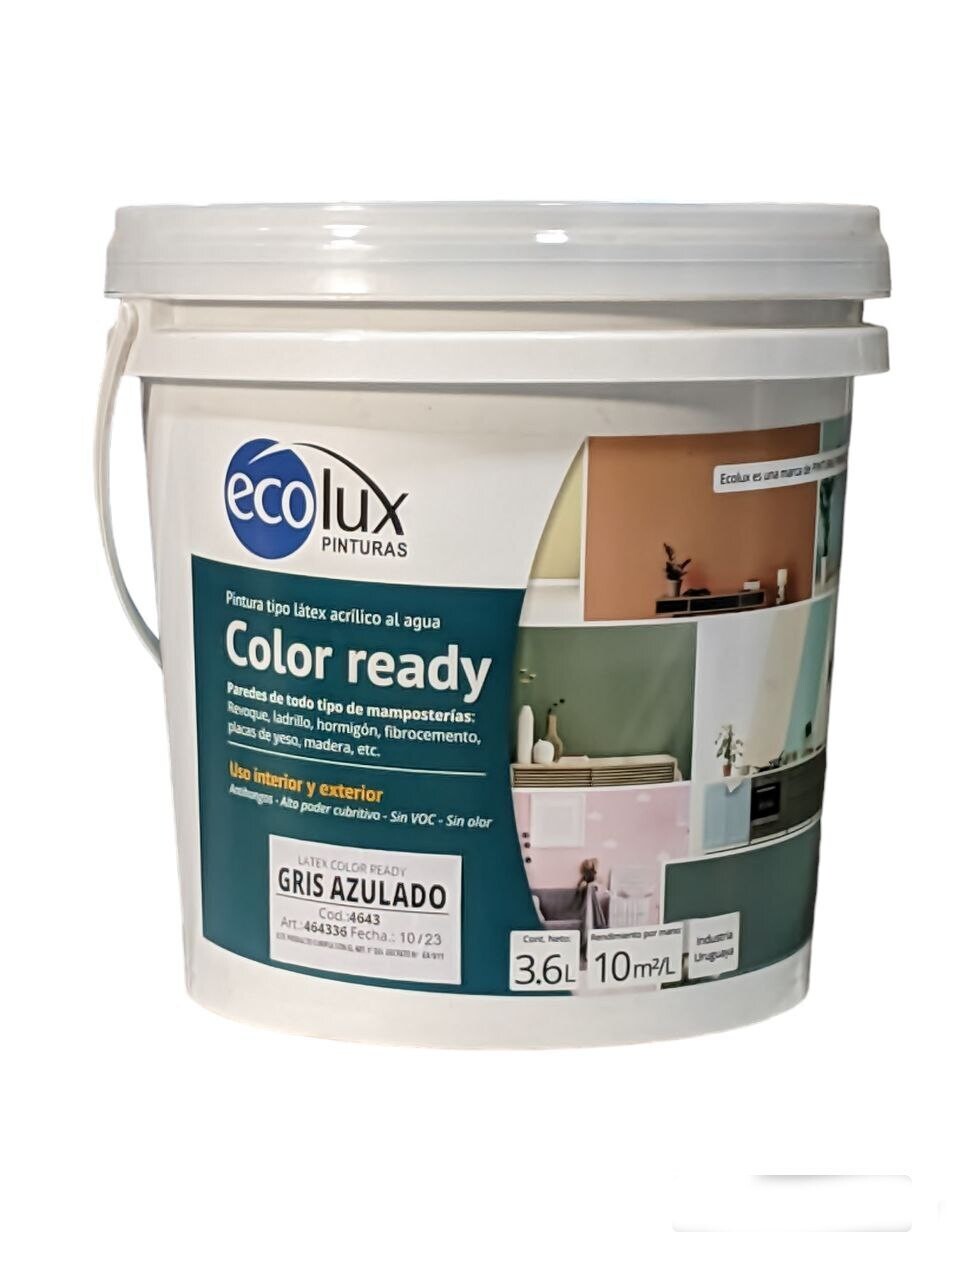 X 3.6 LT PROMET- Color Ready BROTE (463236) LATEX INT/EXT. ECOLUX